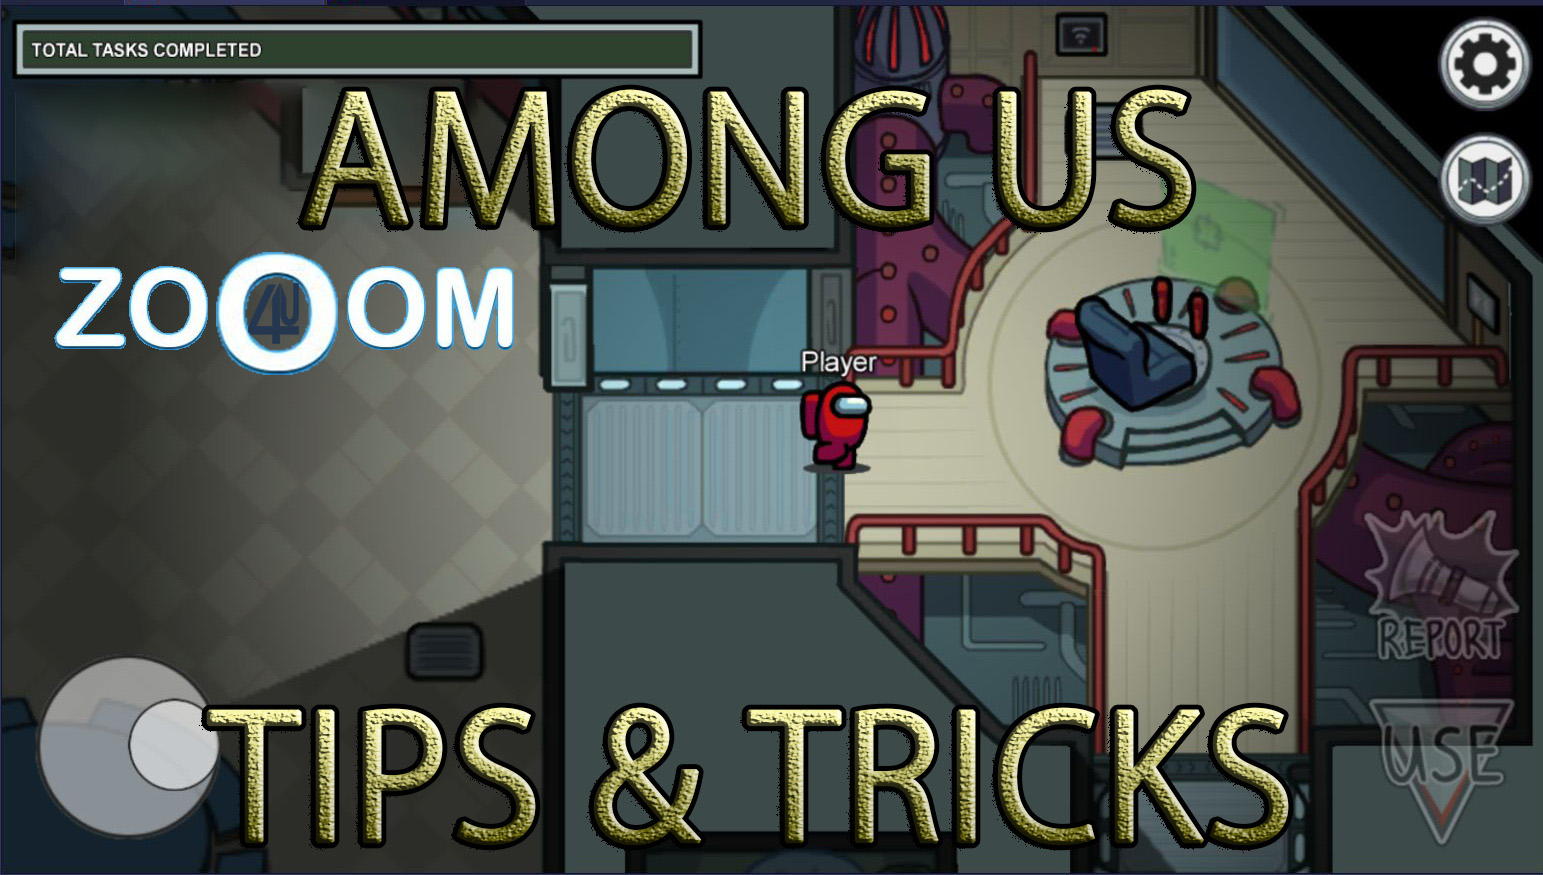 Download Among Us game on Mac and PC for free